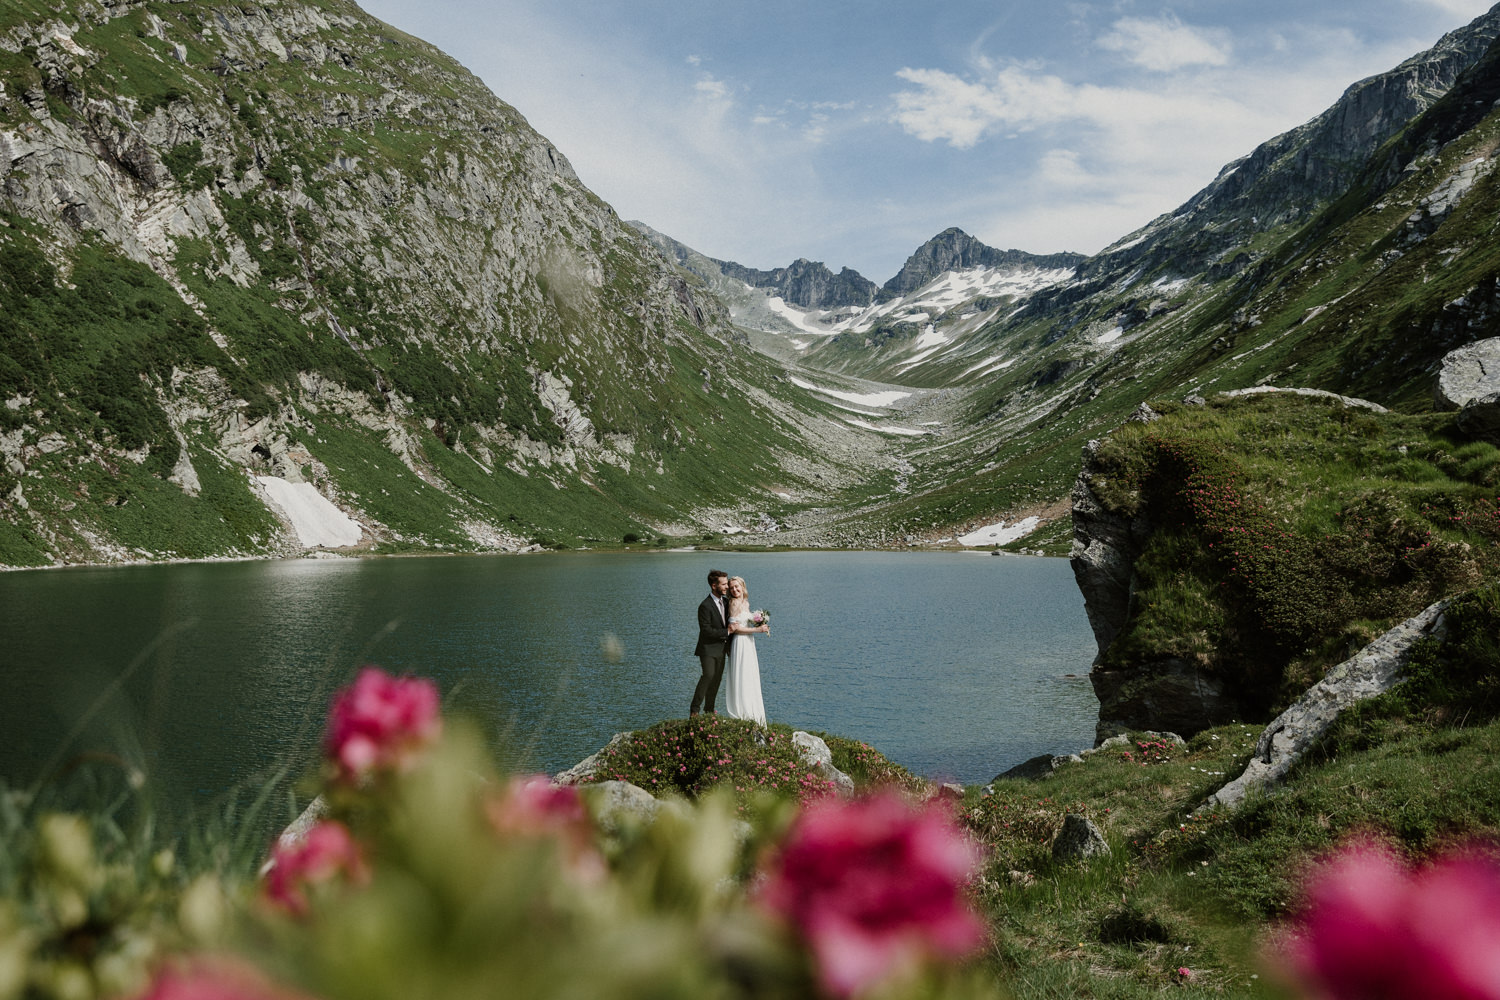 A couple stand small in the center of the frame with dramatic Austrian mountains and a blue lake in the background while hiking. They are framed by pink flowers in the foreground, celebrating their elopement.